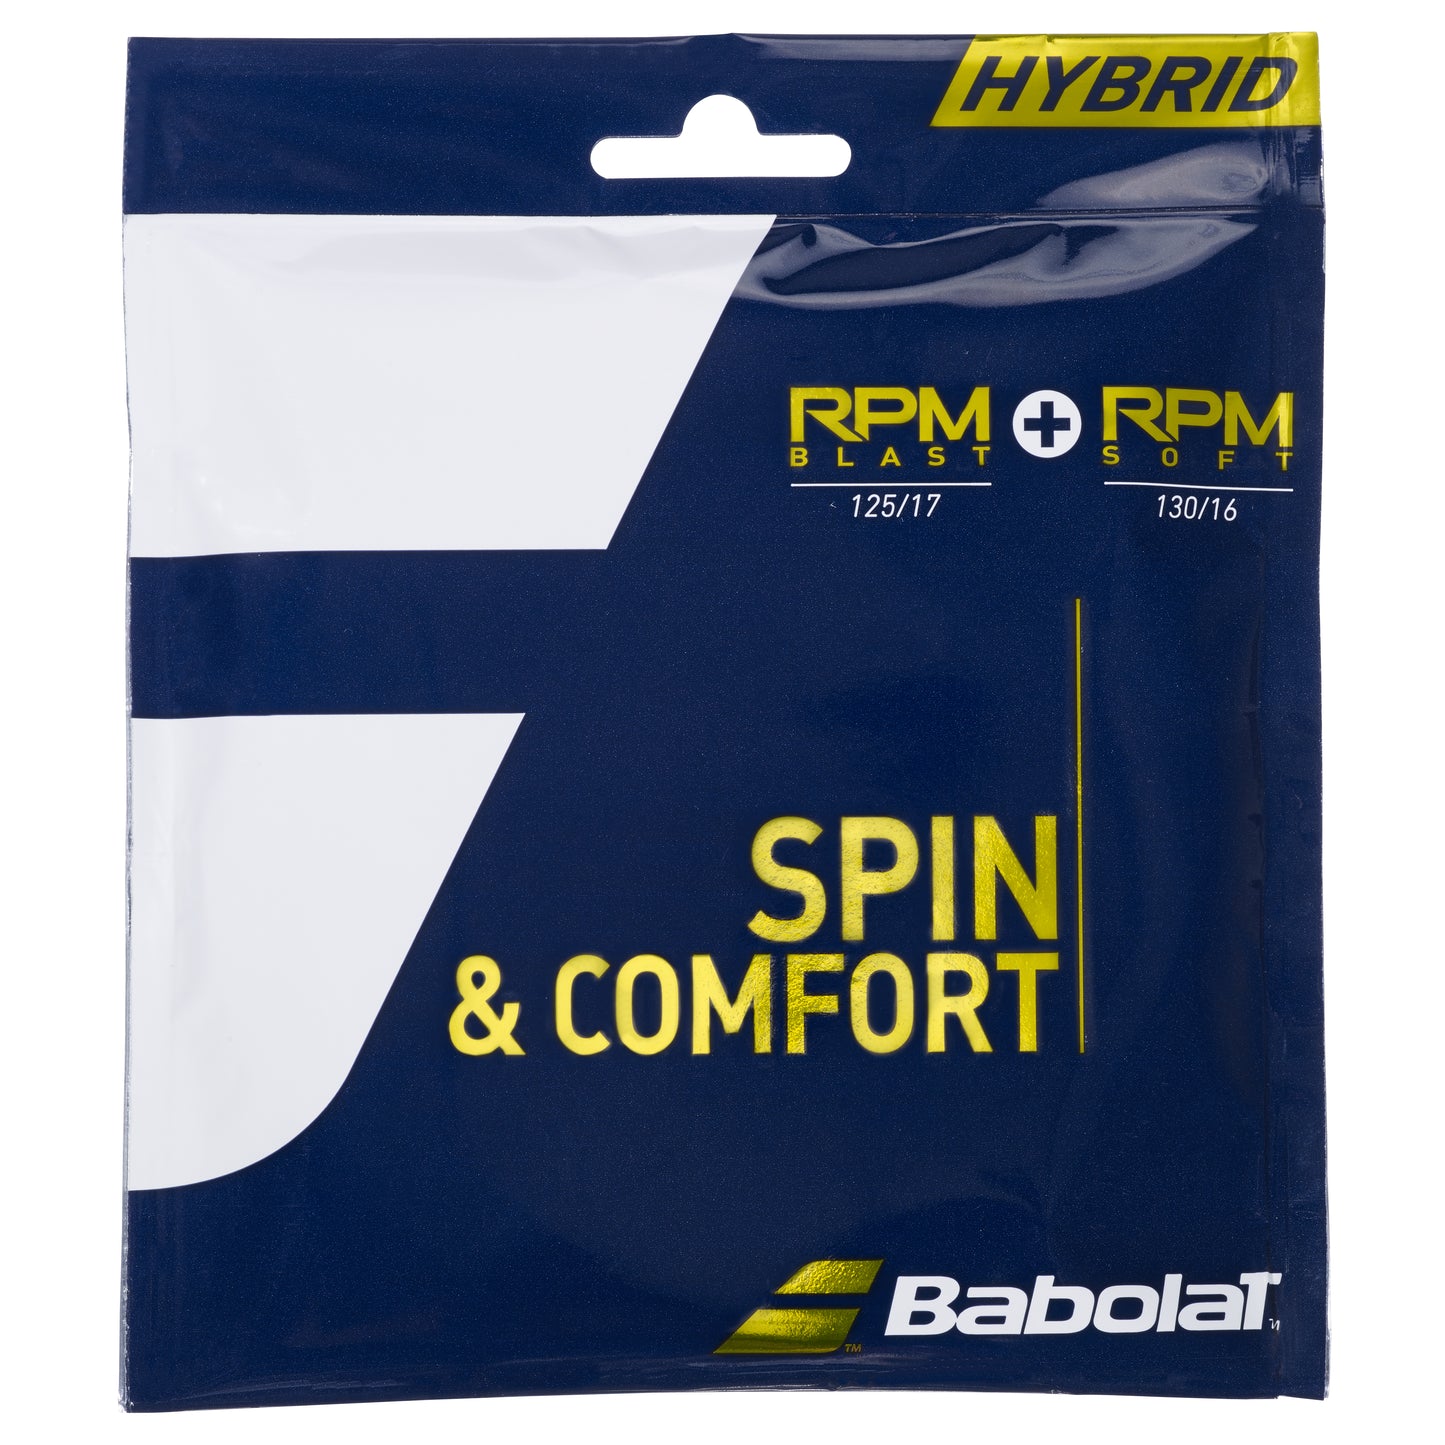 Babolat RPM 17G VS Touch 16G Tennis String (), 46% OFF